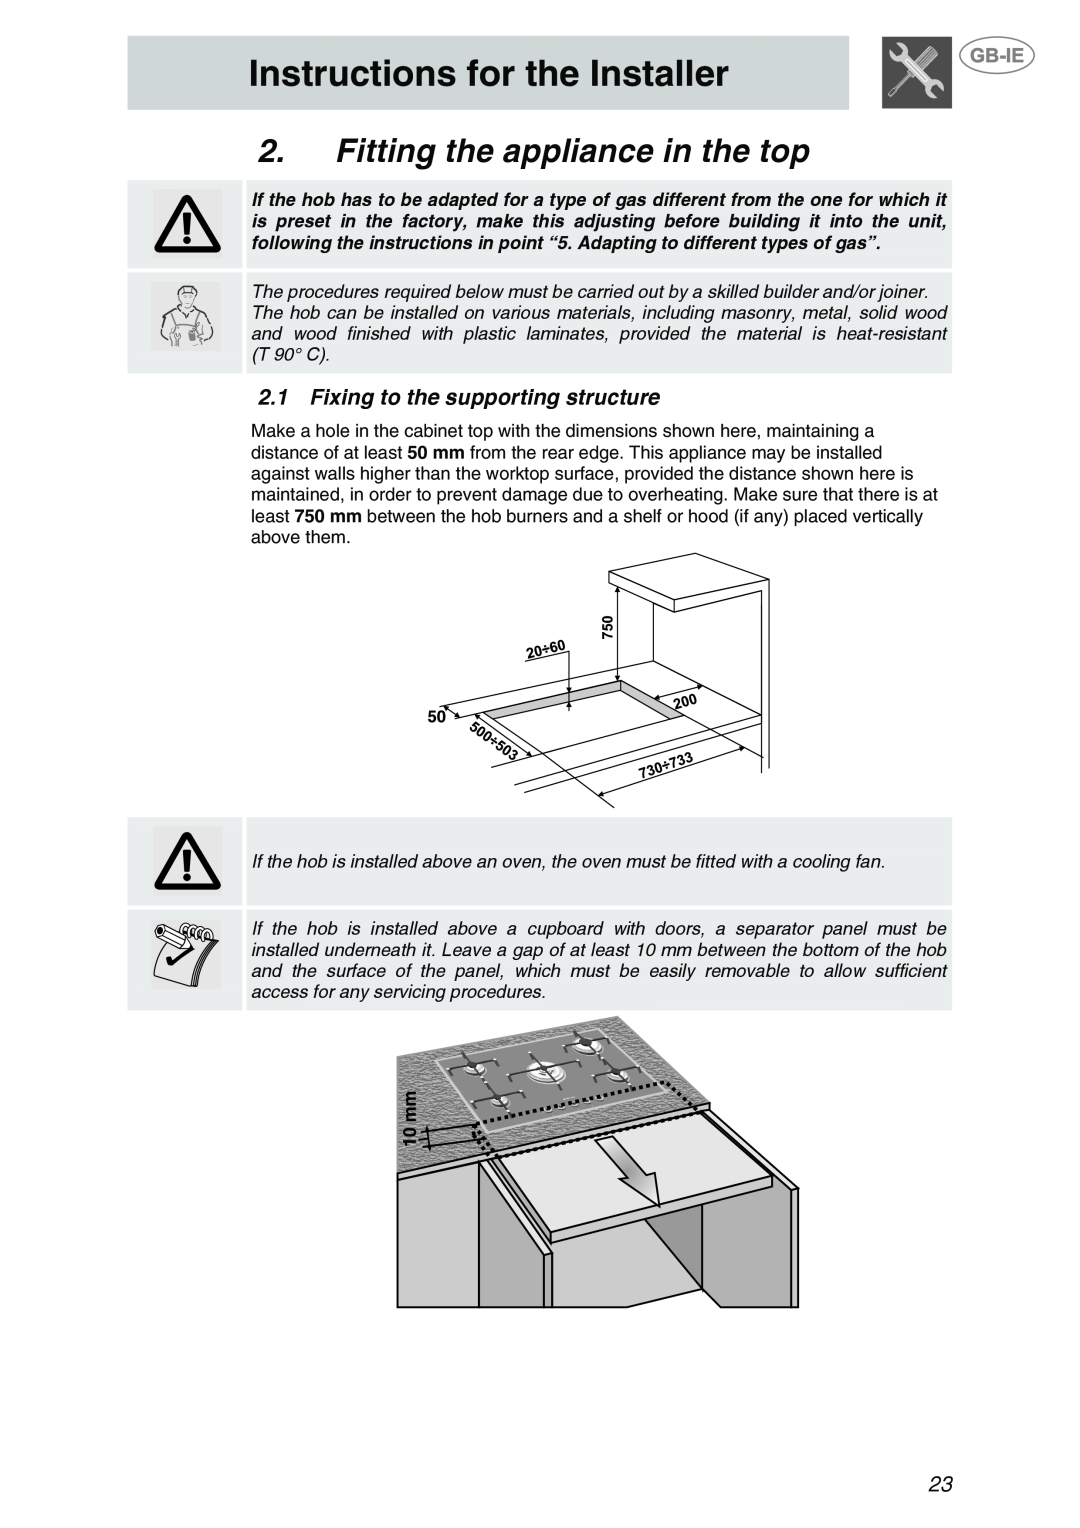 Smeg PVA750D manual Instructions for the Installer, Fitting the appliance in the top, Fixing to the supporting structure 